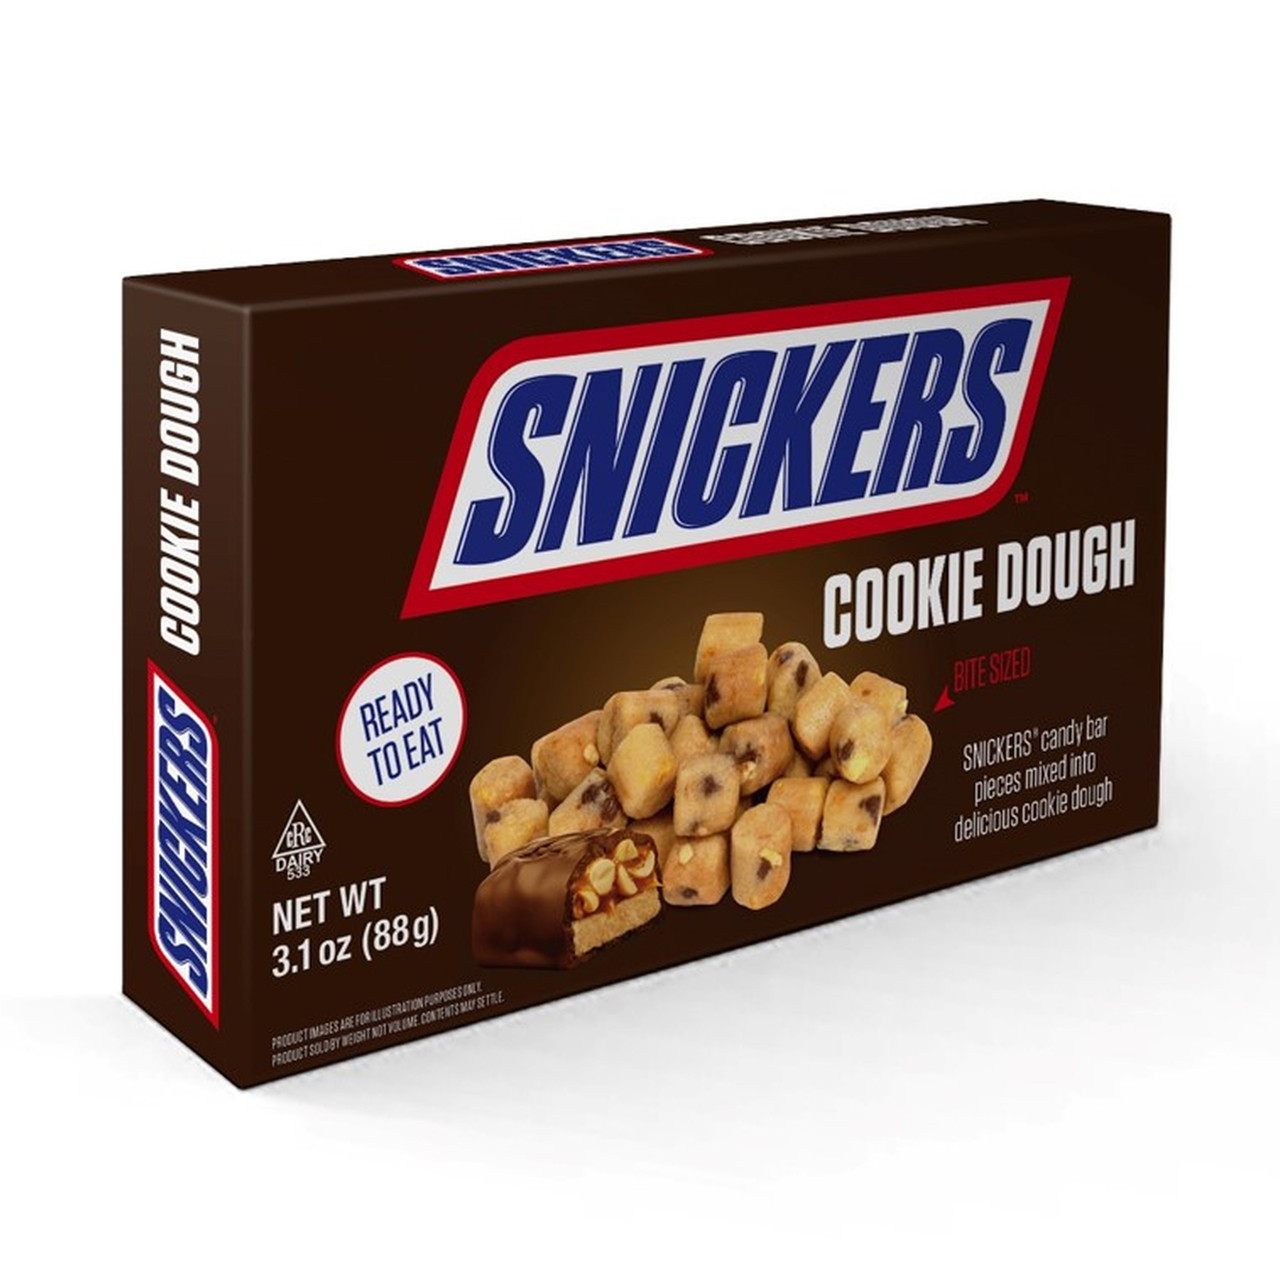 The Original Chocolate Chip Cookie Dough Bites Candy-Theater Box Size-2  BOXES